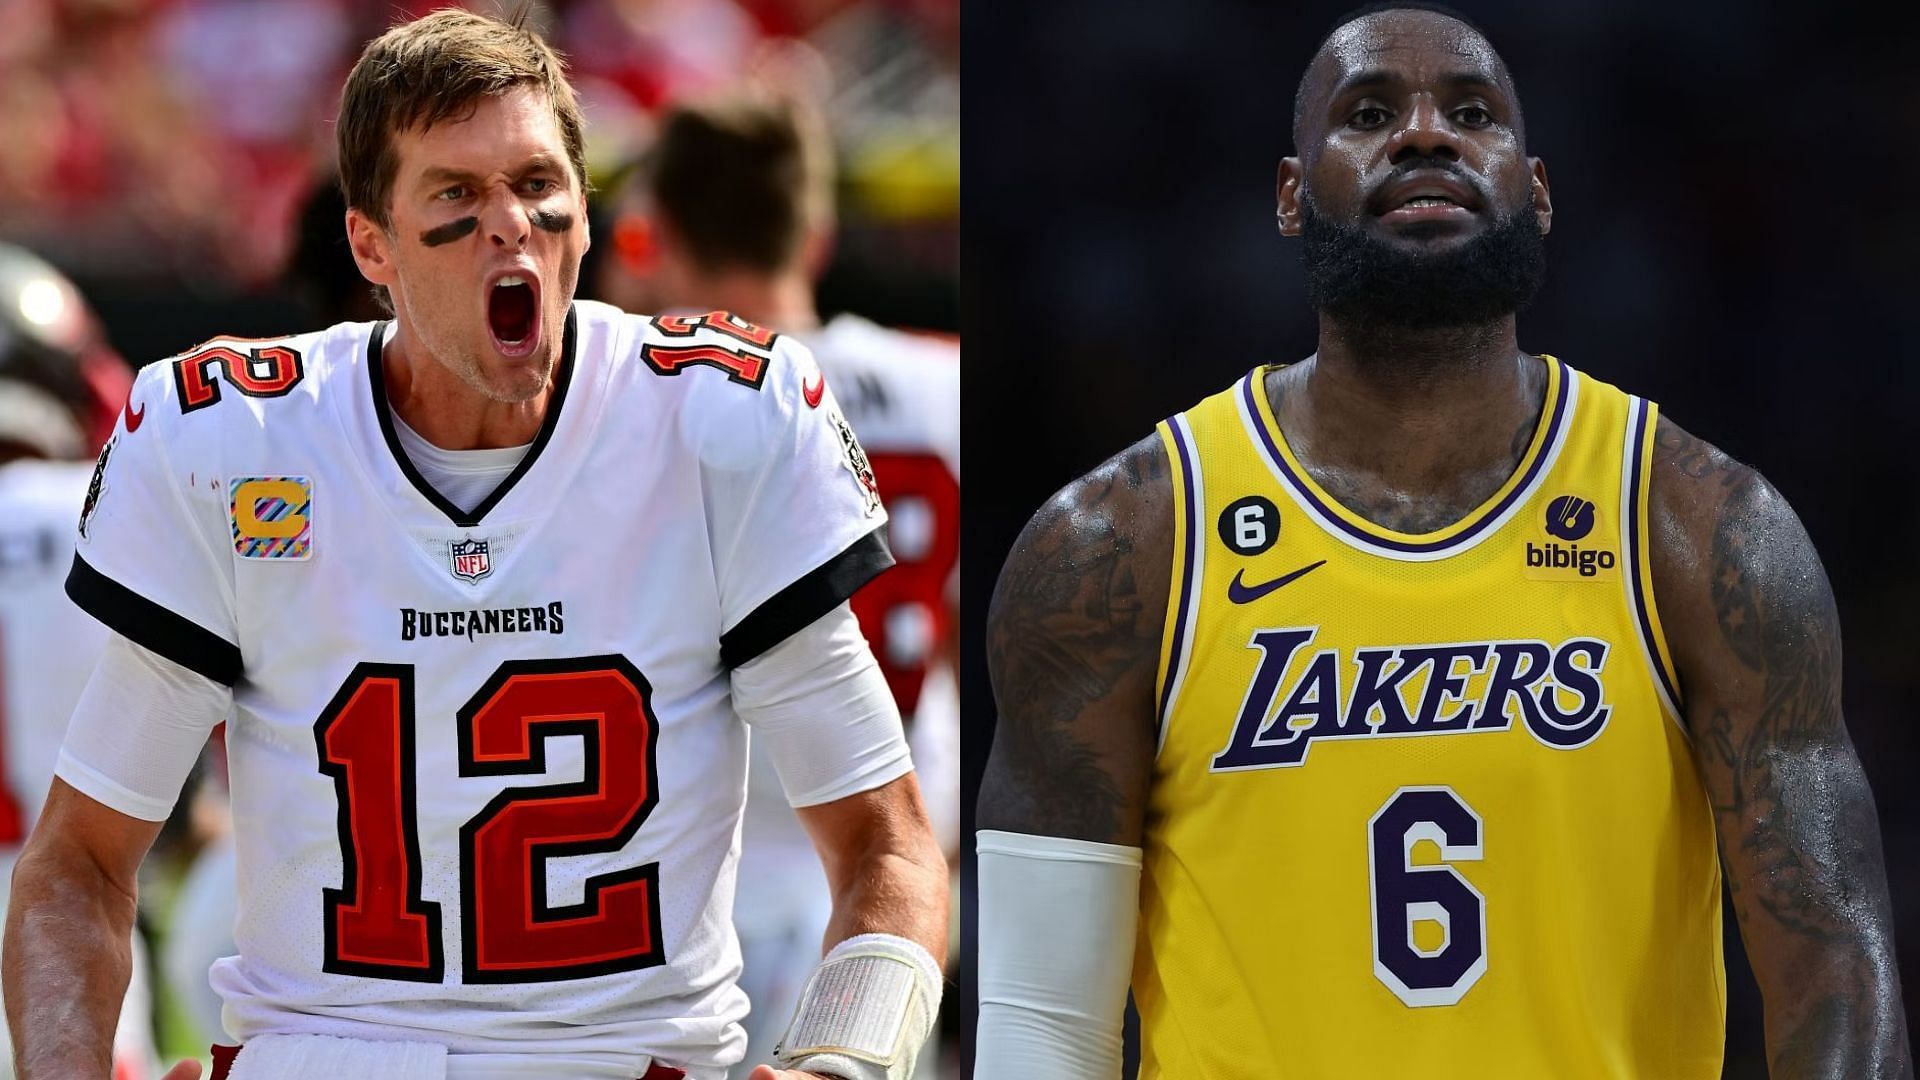 Quarterback Tom Brady once recruited LeBron James to play as an NFL tight end.